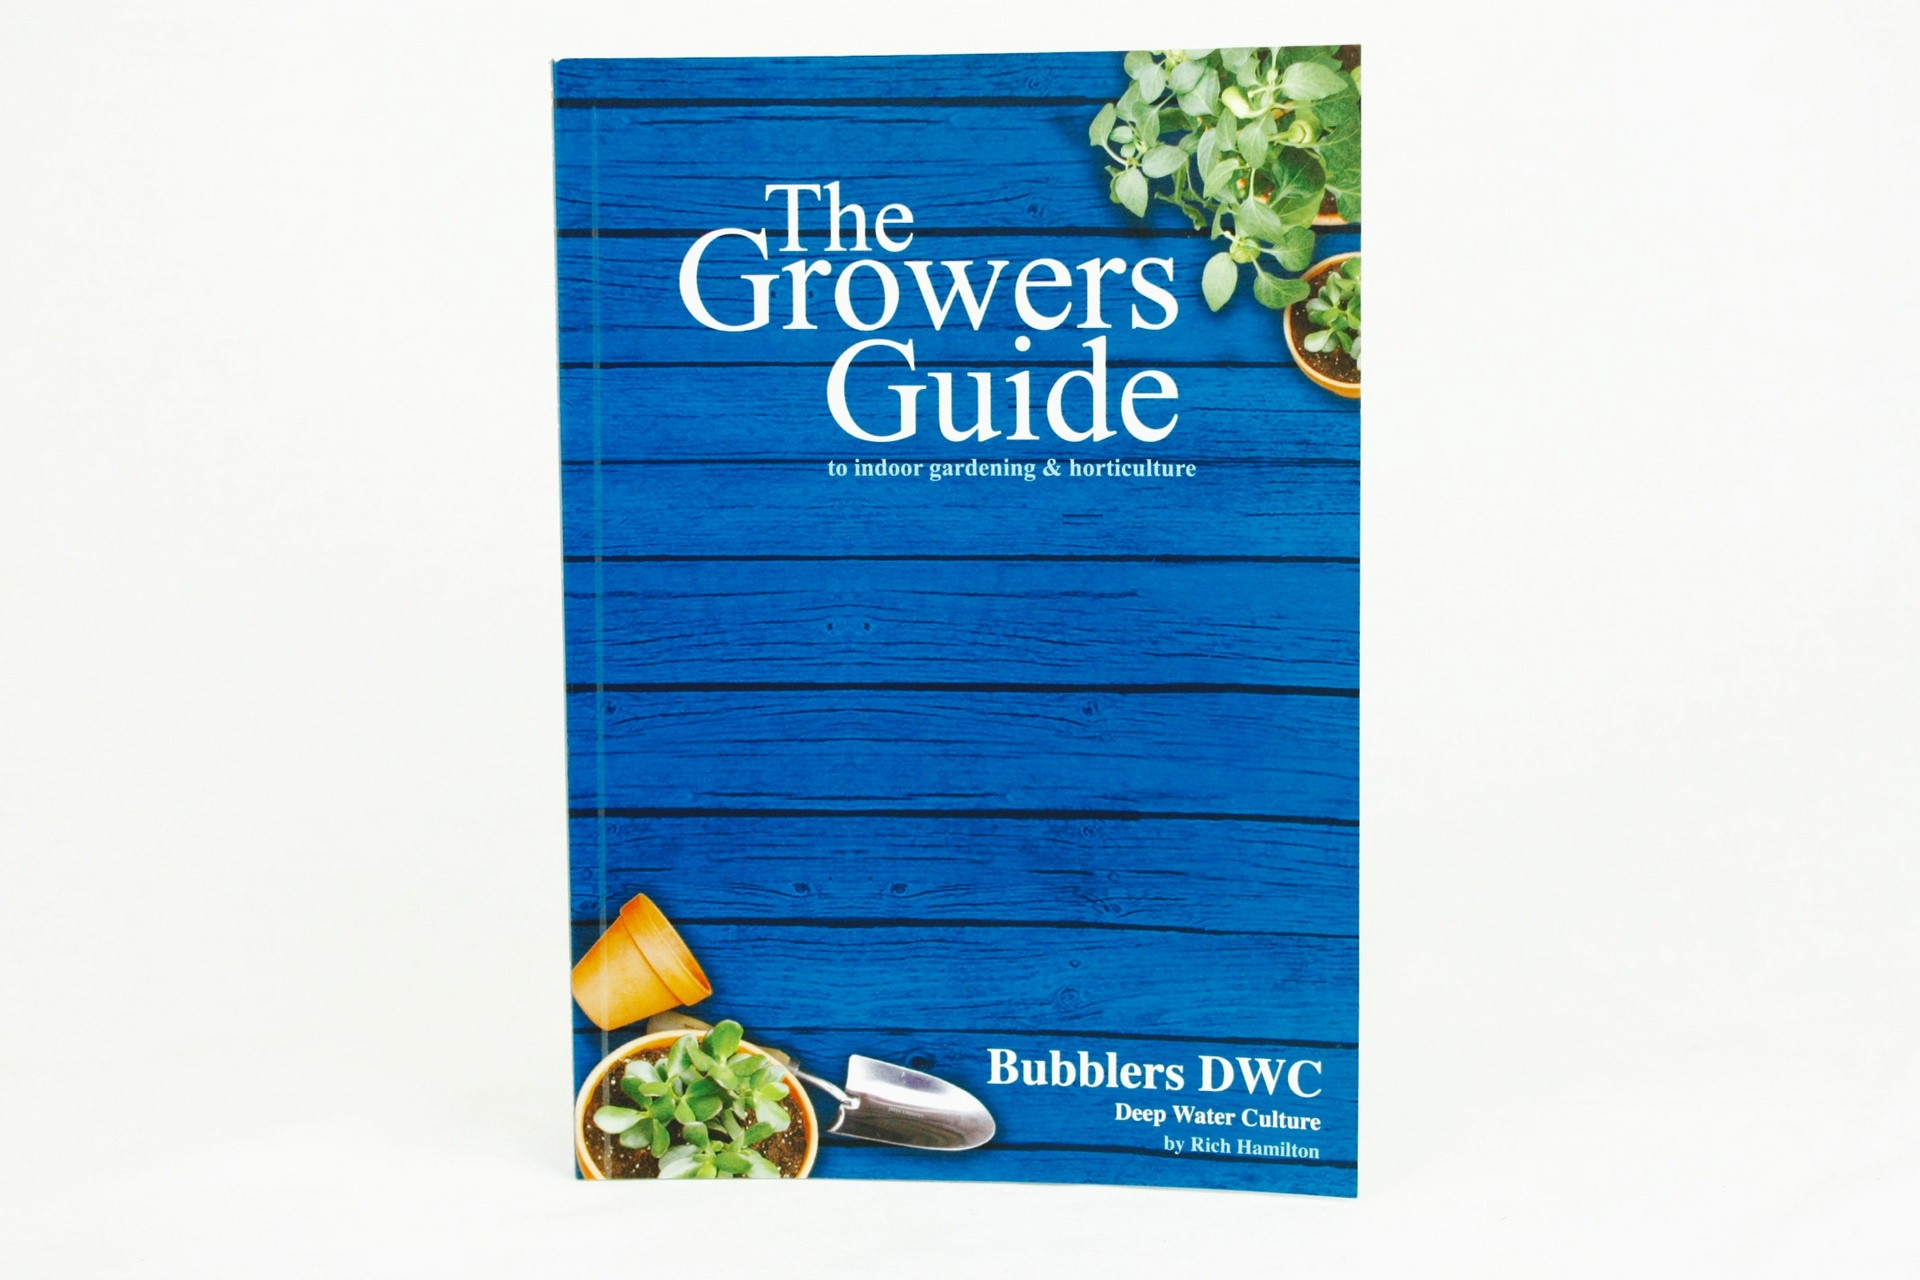 THE GROWERS GUIDE TO BUBBLERS & DWC